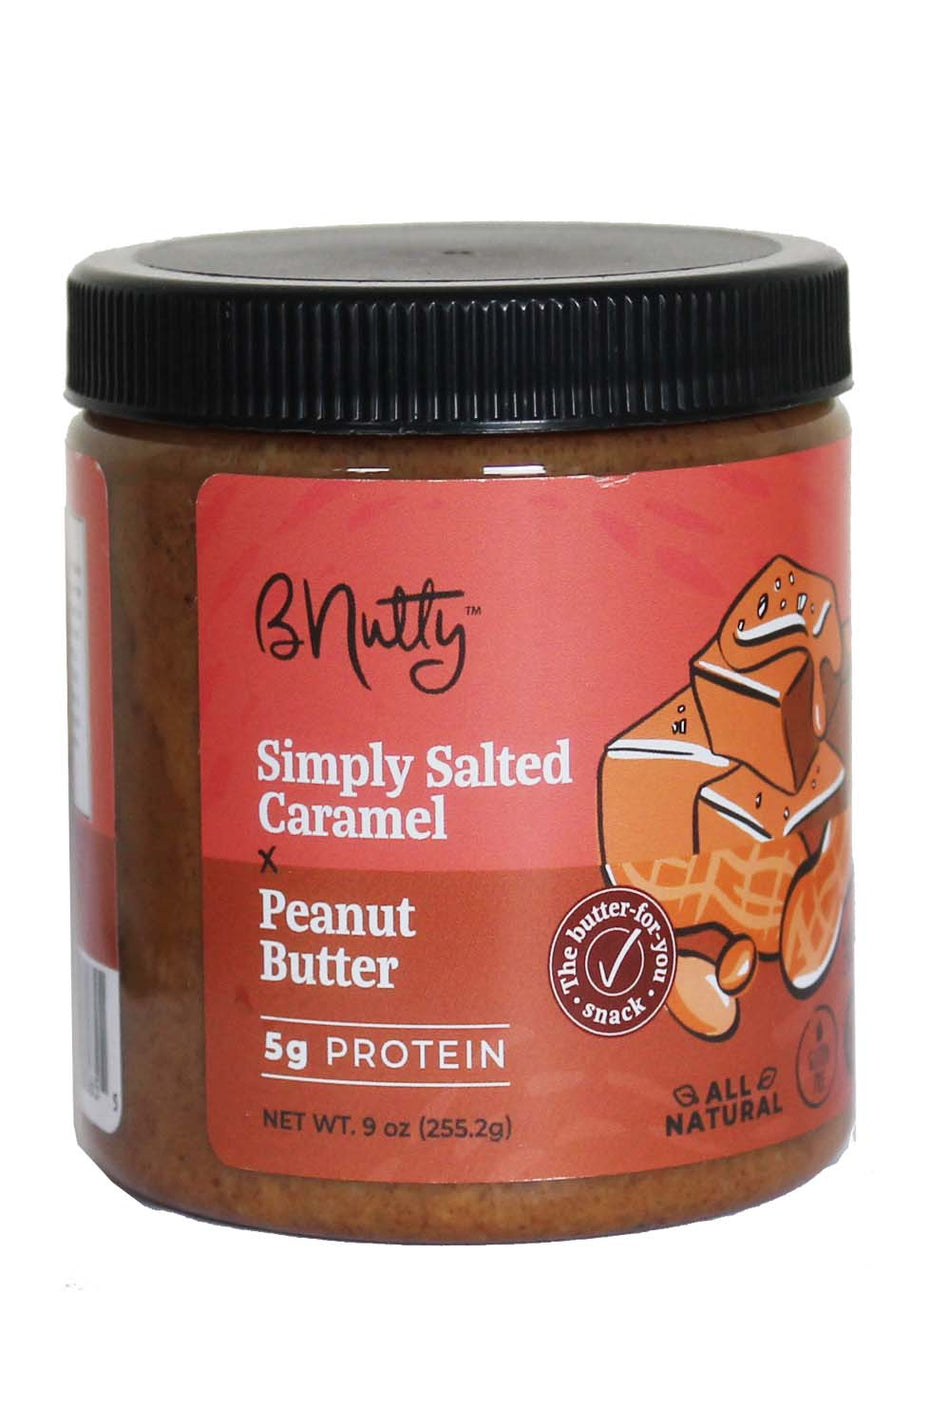 Bnutty Simply Salted Caramel Peanut Butter